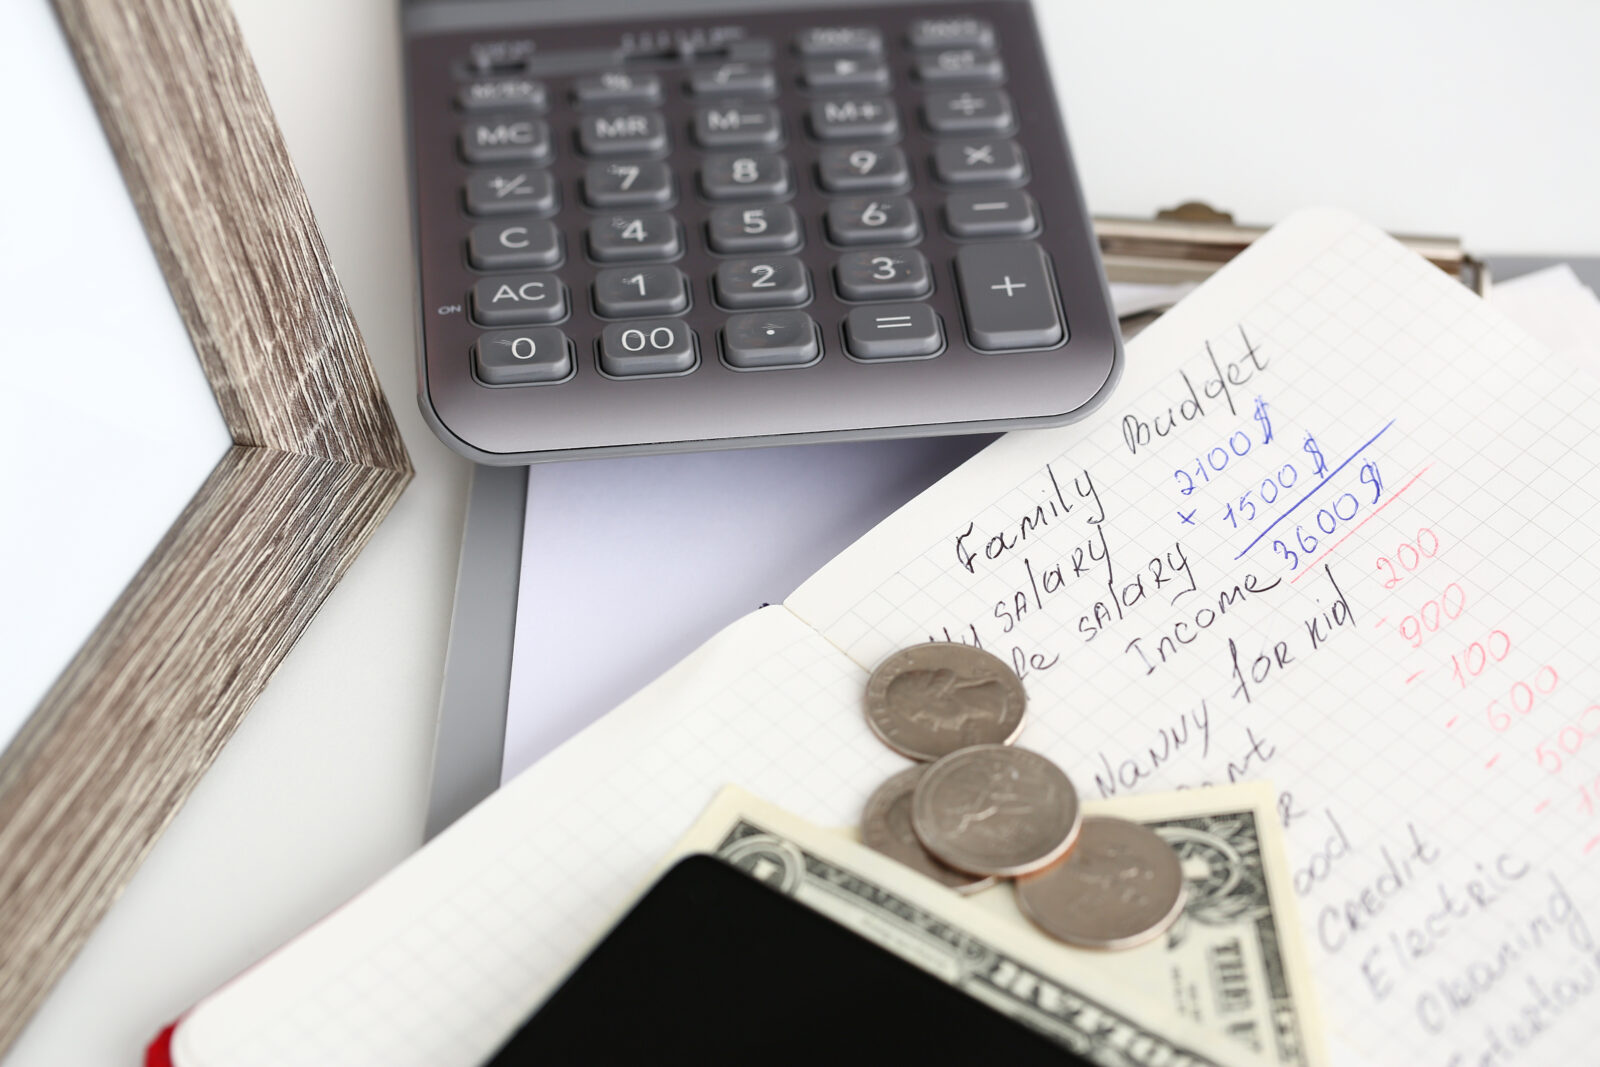 5 Tips for Managing Your Budget When Money is Tight